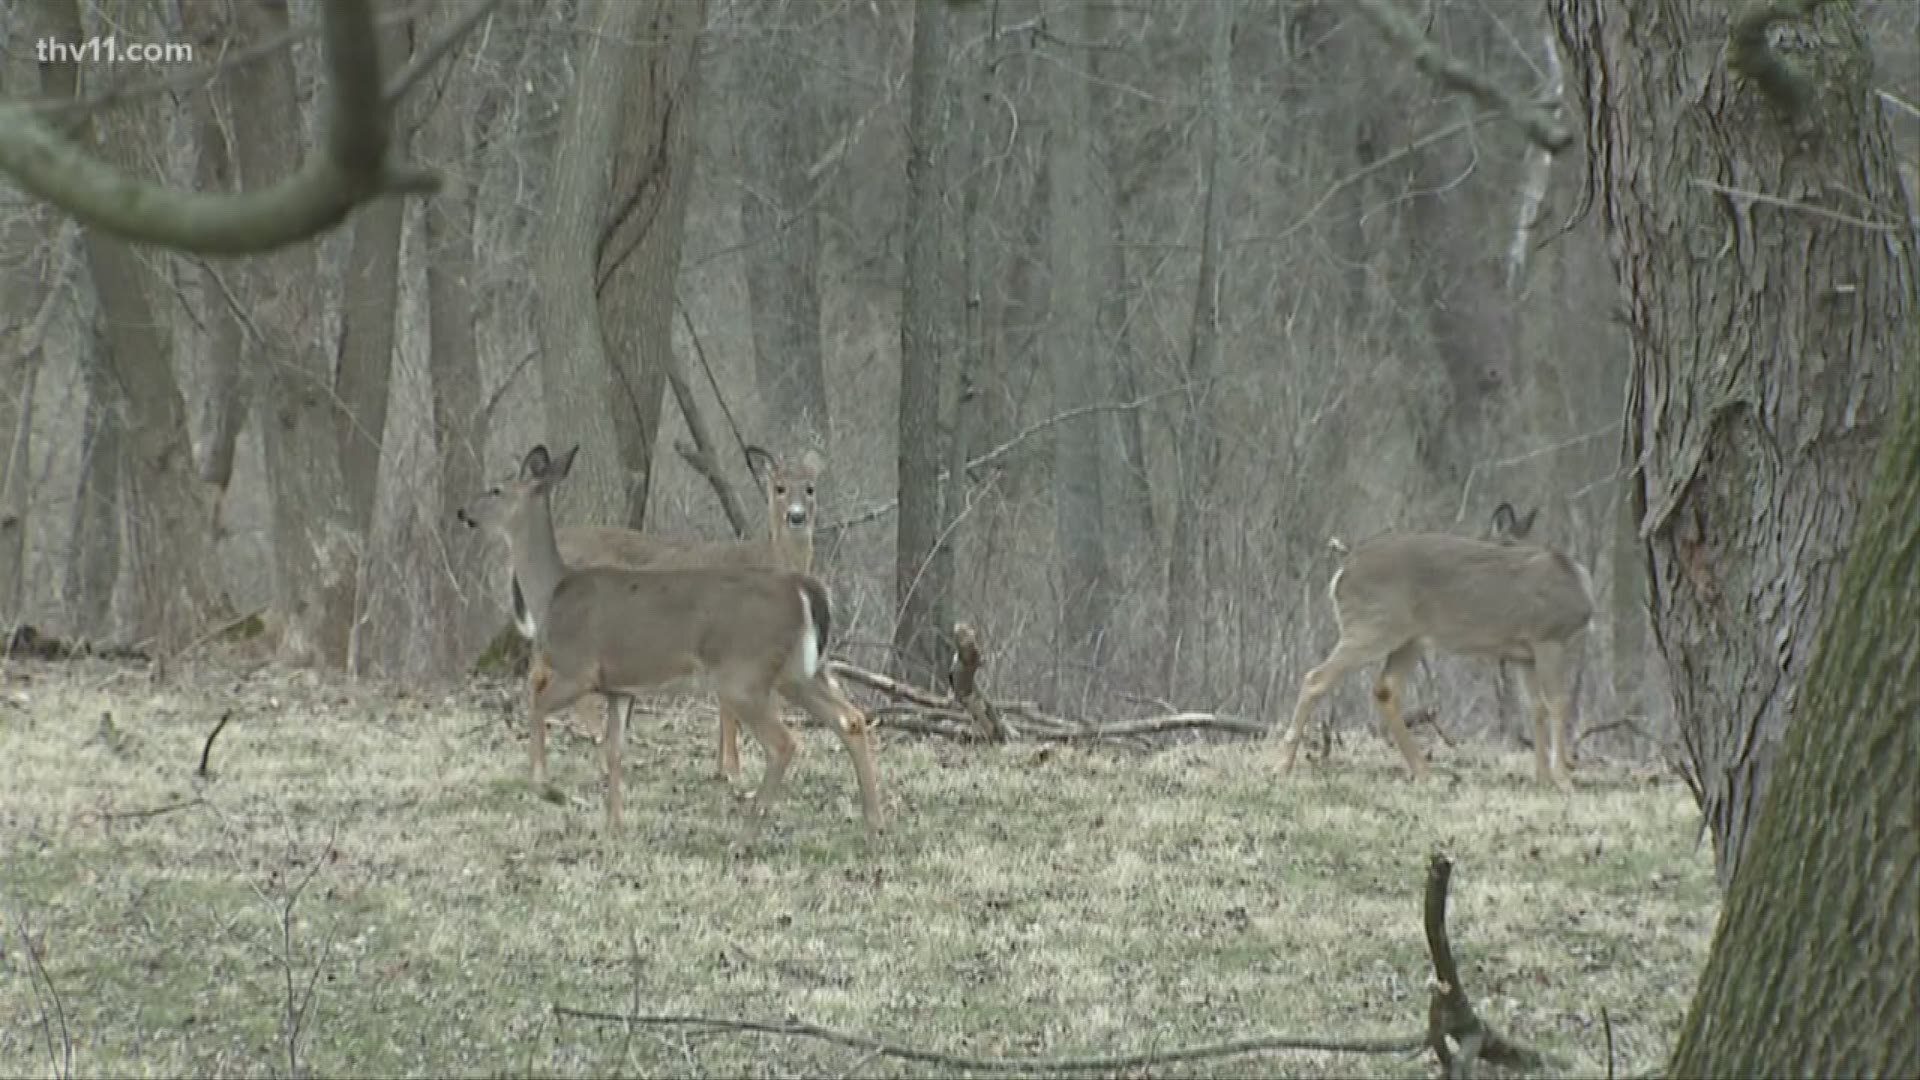 Bad news for hunters in Scott County, Arkansas game and fish report a deer has tested positive for chronic wasting disease.